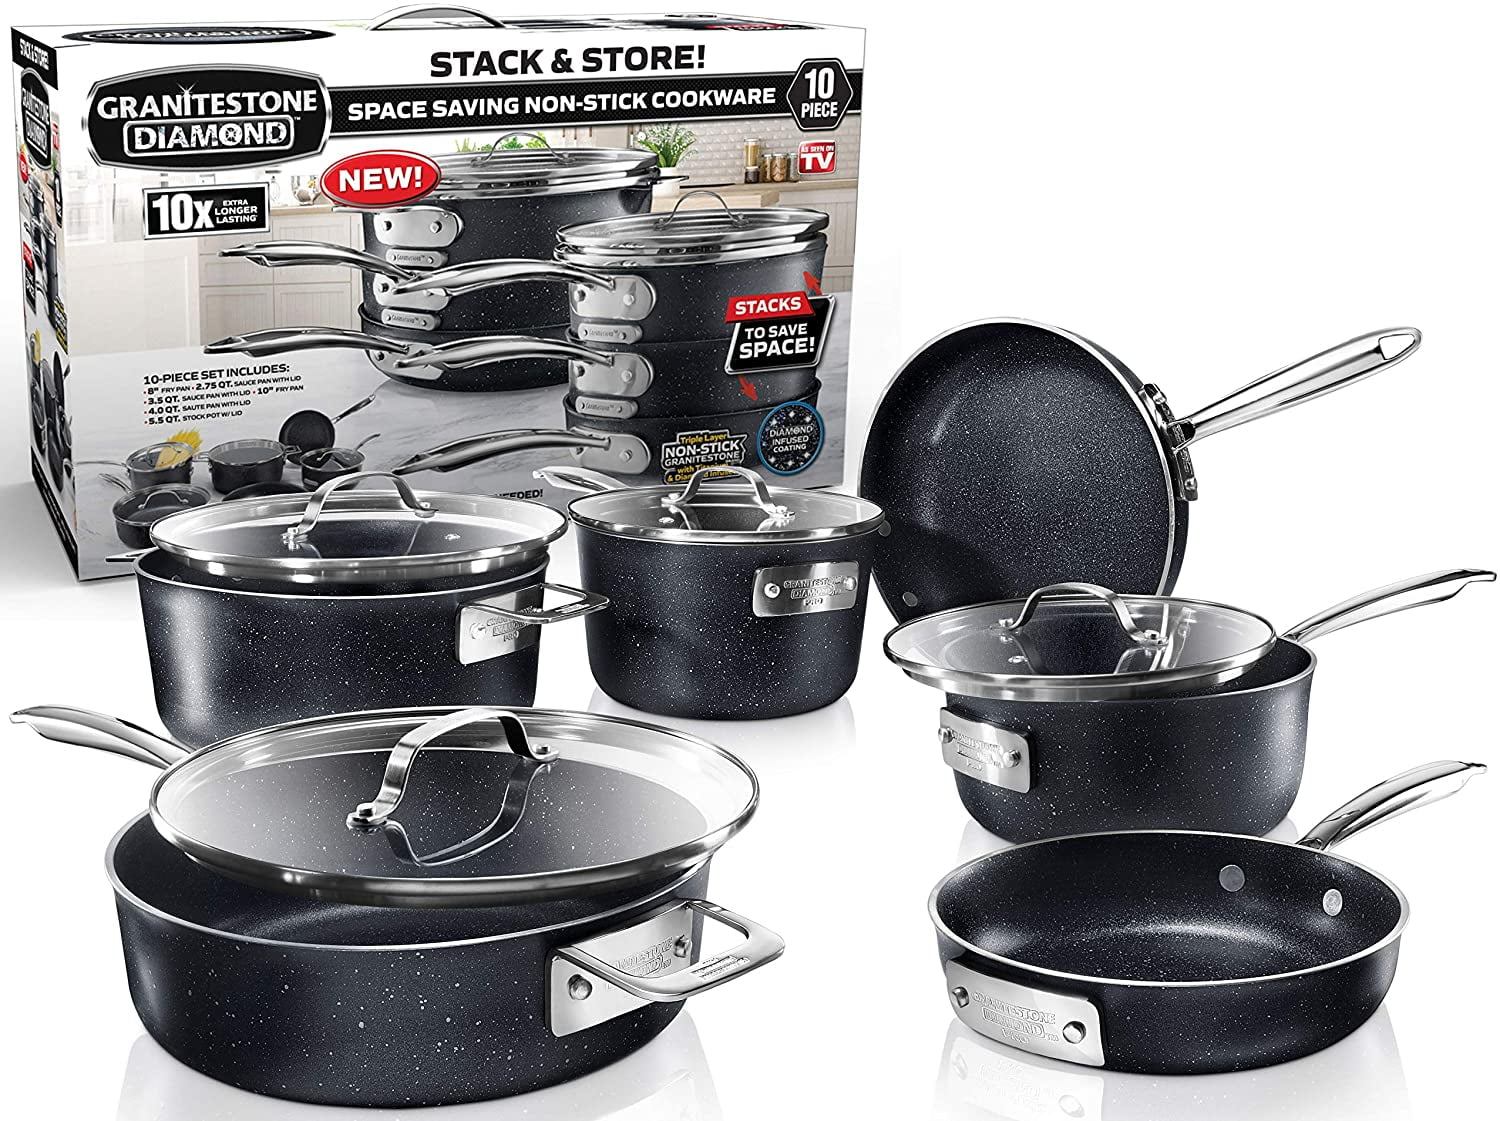 review of stackmaster cookware